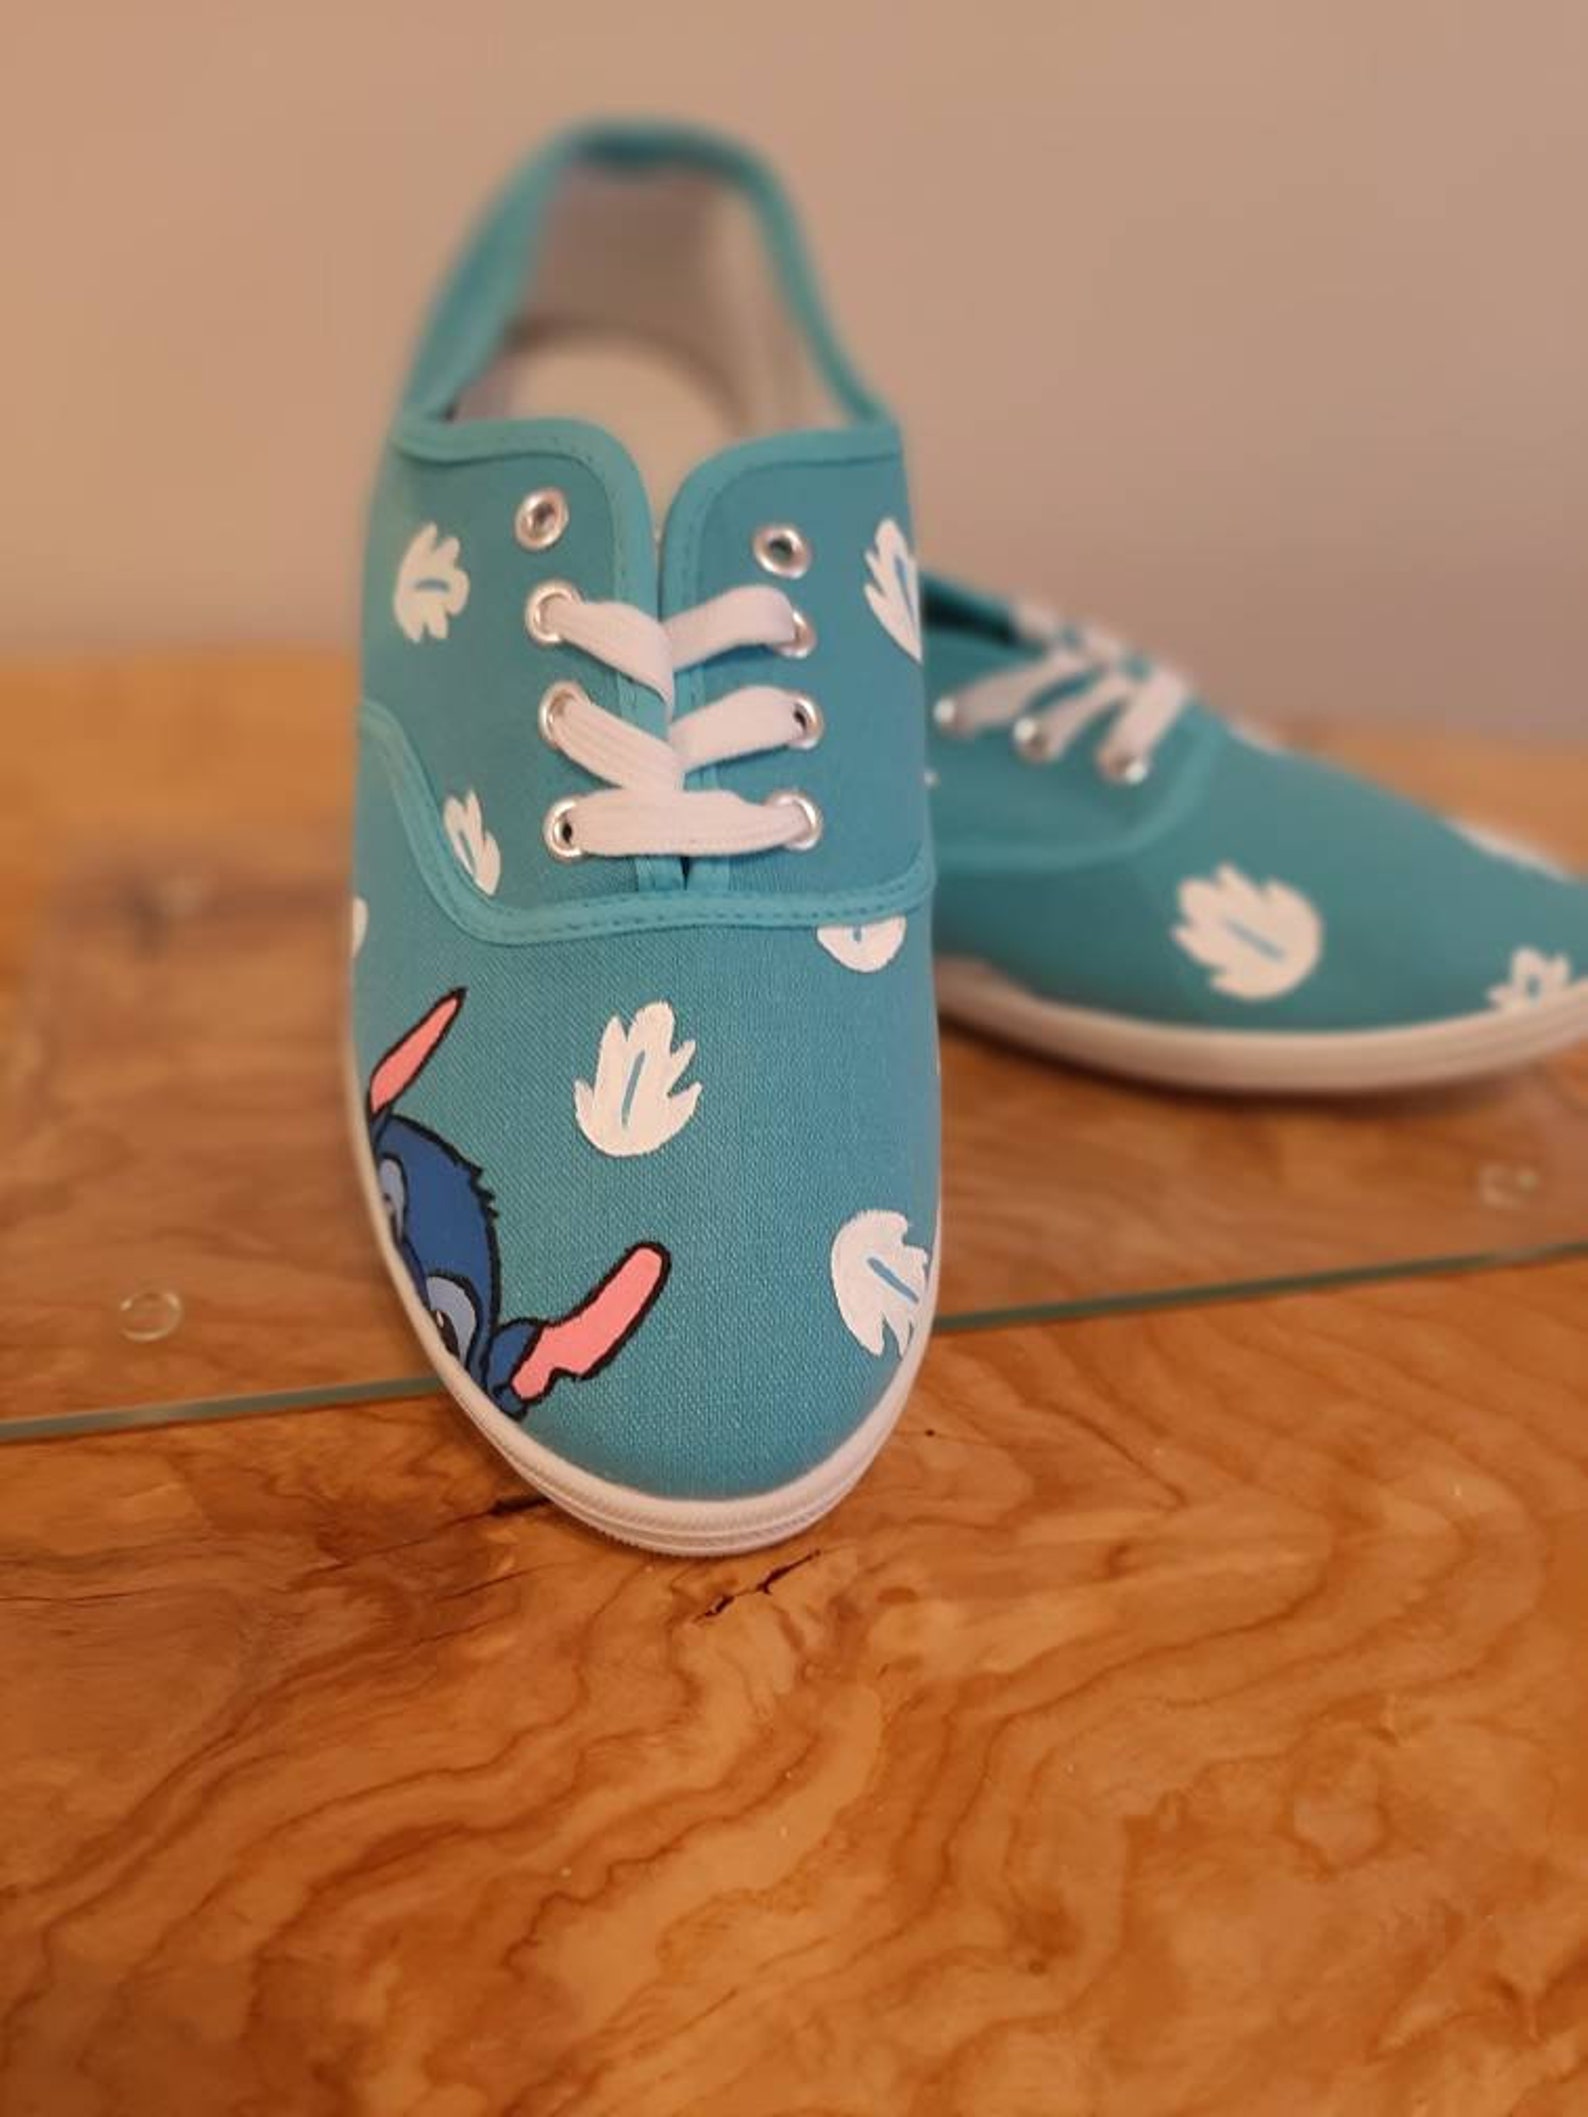 Hand Painted Lilo and Stitch Shoes | Etsy